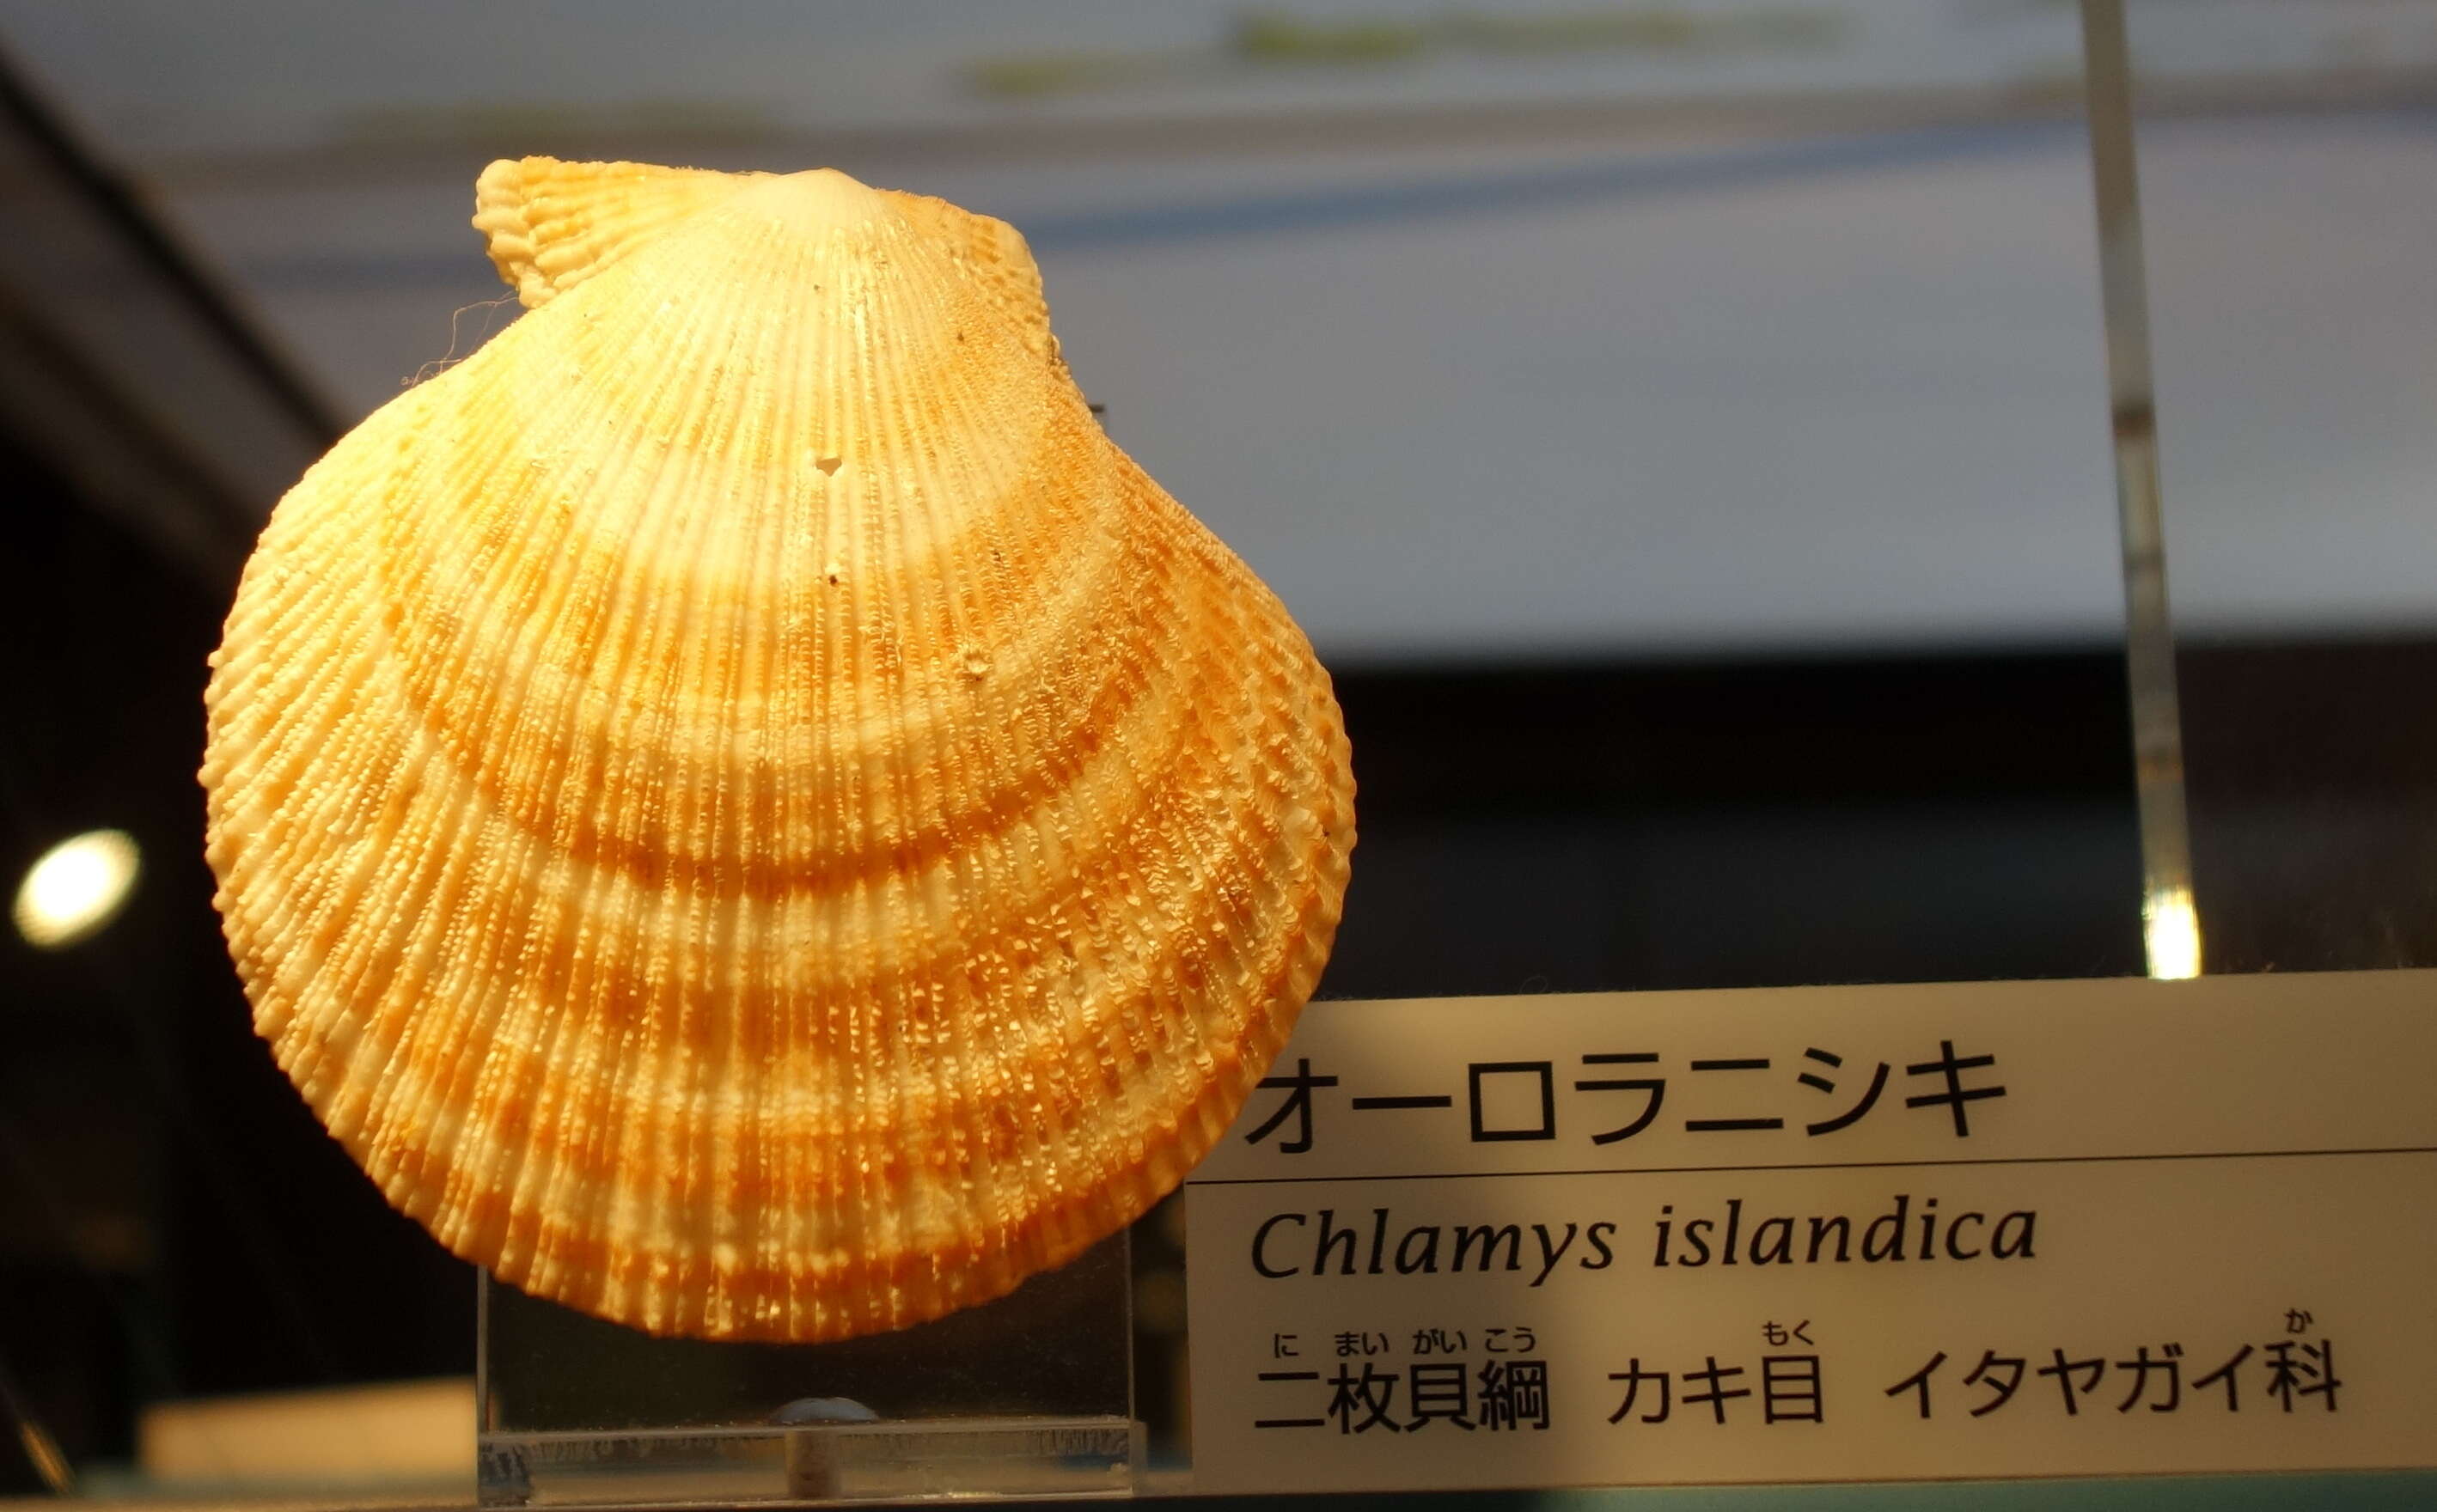 Image of Iceland scallop